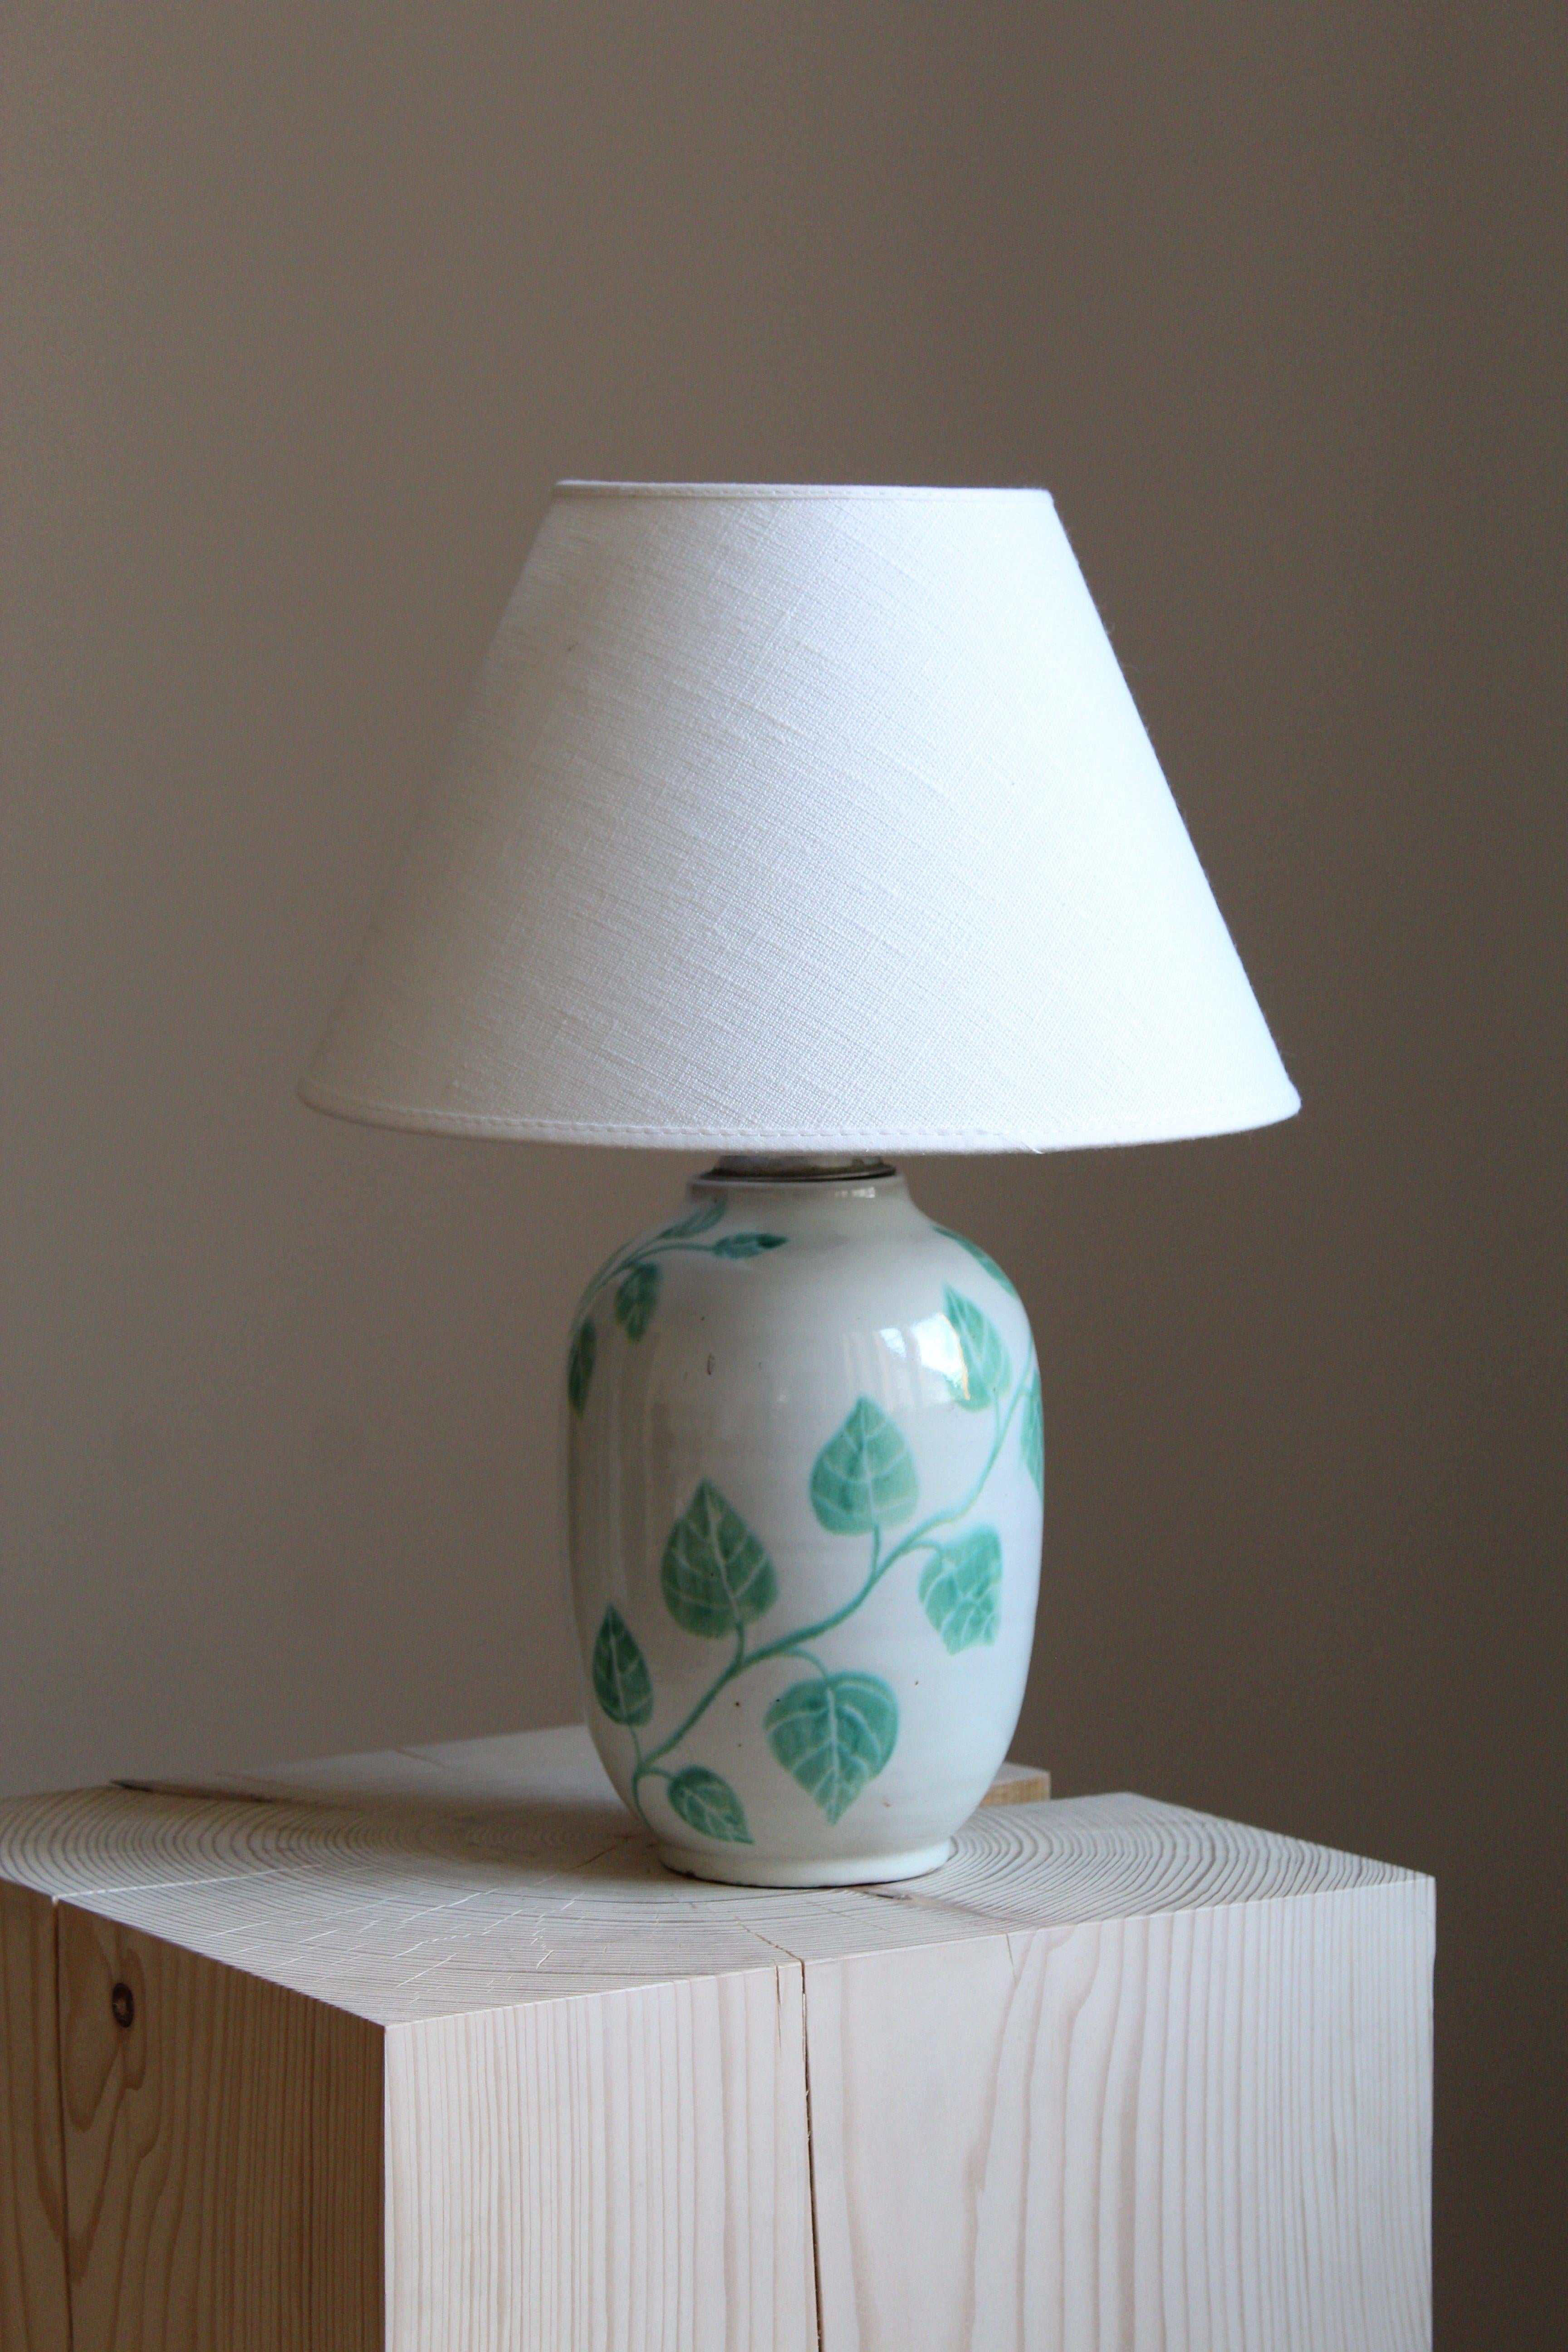 An early modernist table lamp. Designed by Anna-Lisa Thomson, for Upsala-Ekeby, Sweden, 1940s. With stamp including artist's initials. Sold without lampshade.

Glaze features white-green colors.

Other designers of the period include Ettore